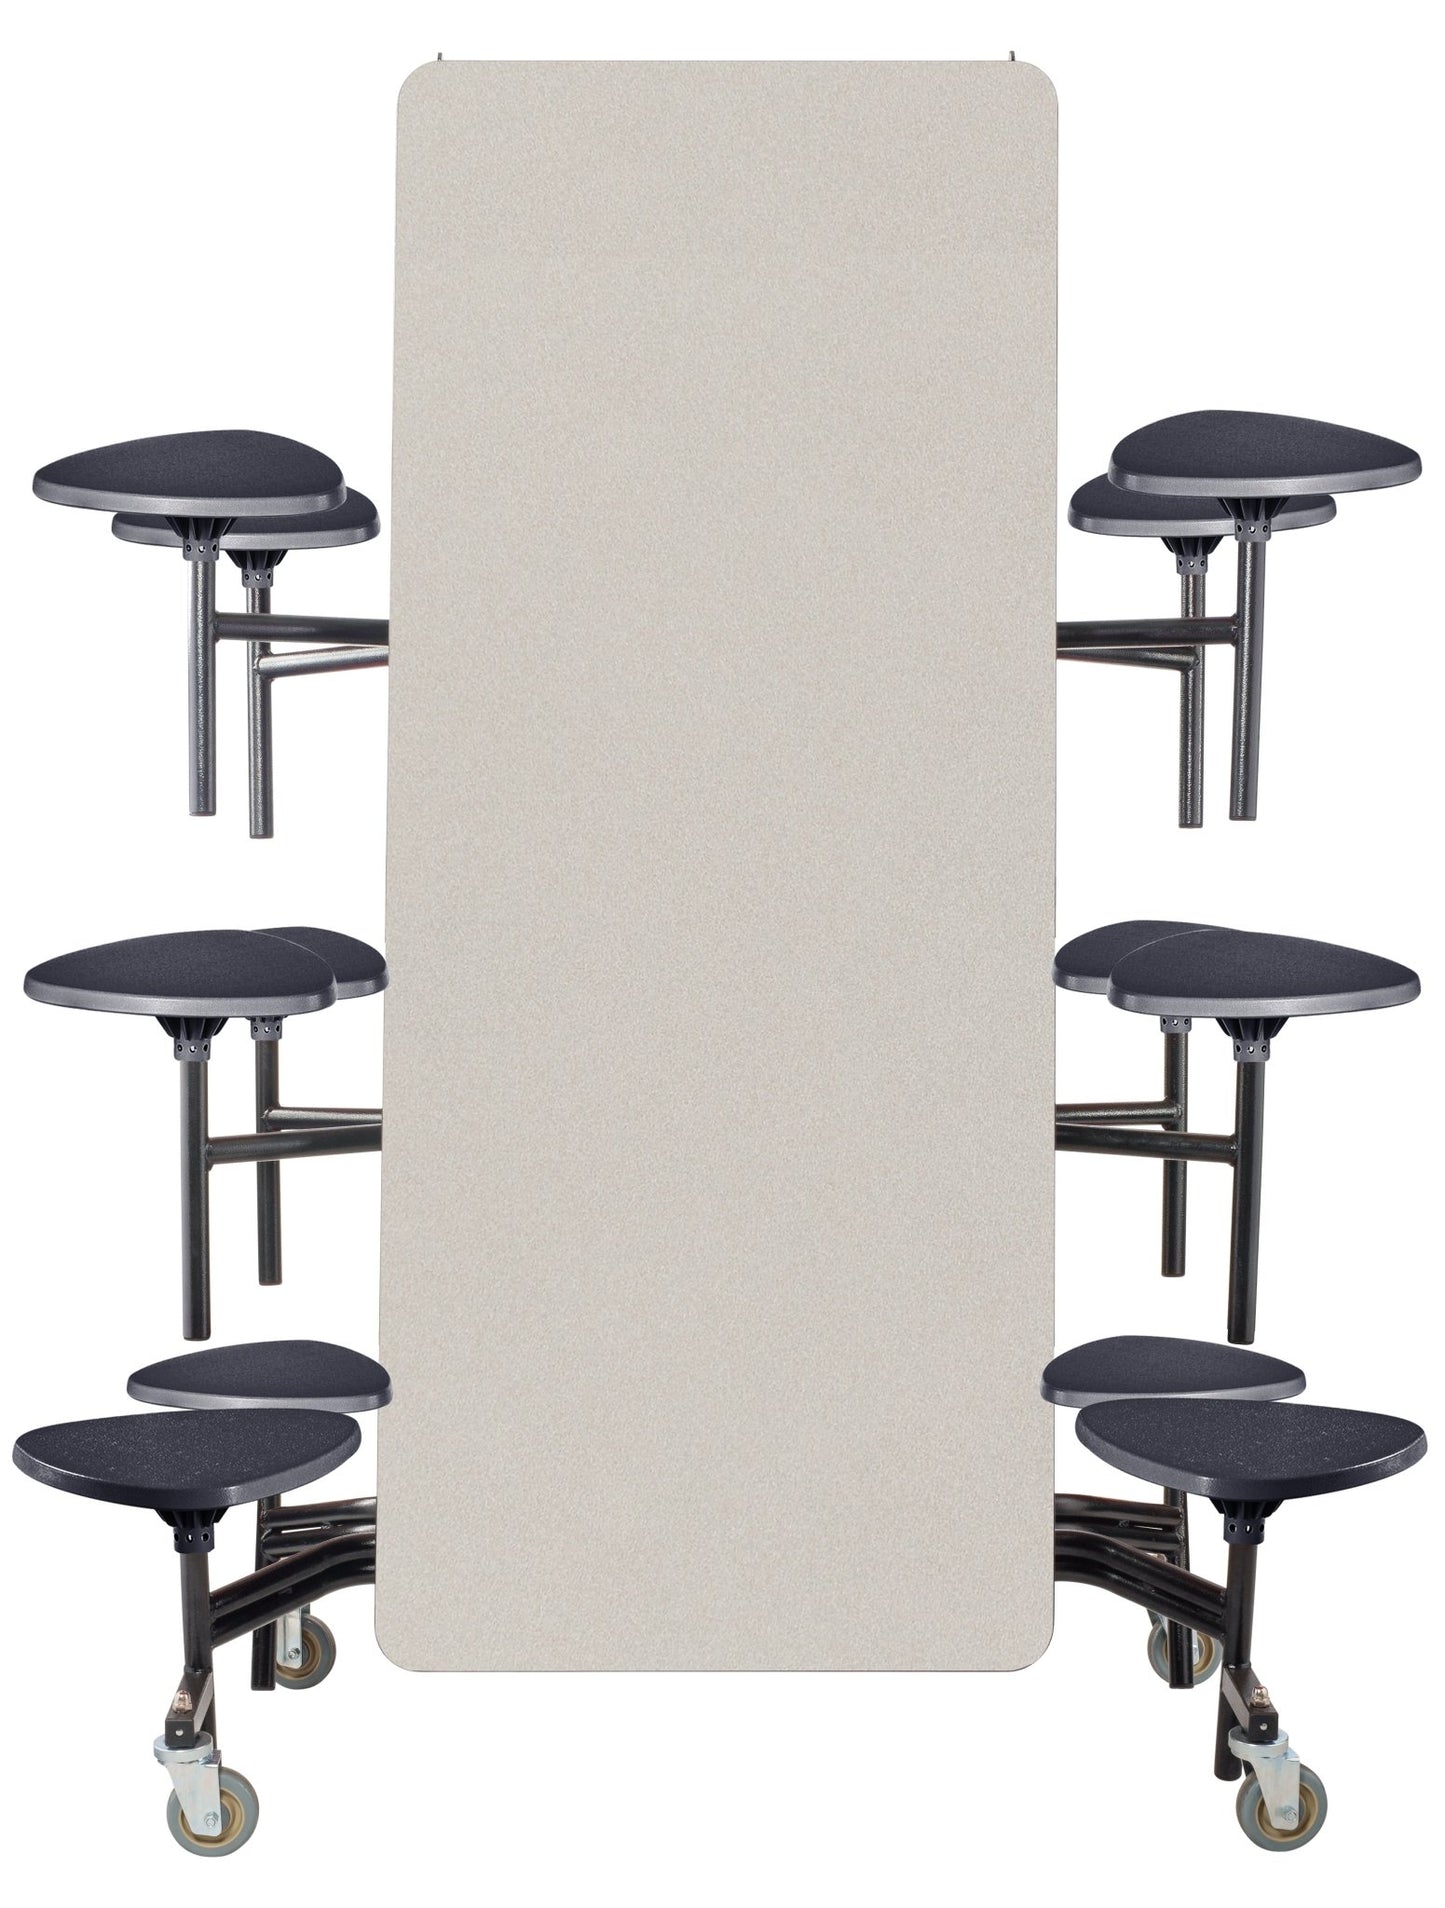 Mobile Cafeteria Lunchroom Stool Table - 30" W x 12' L - 12 Stools - Plywood Core - Protect Edge - Chrome Frame - SchoolOutlet